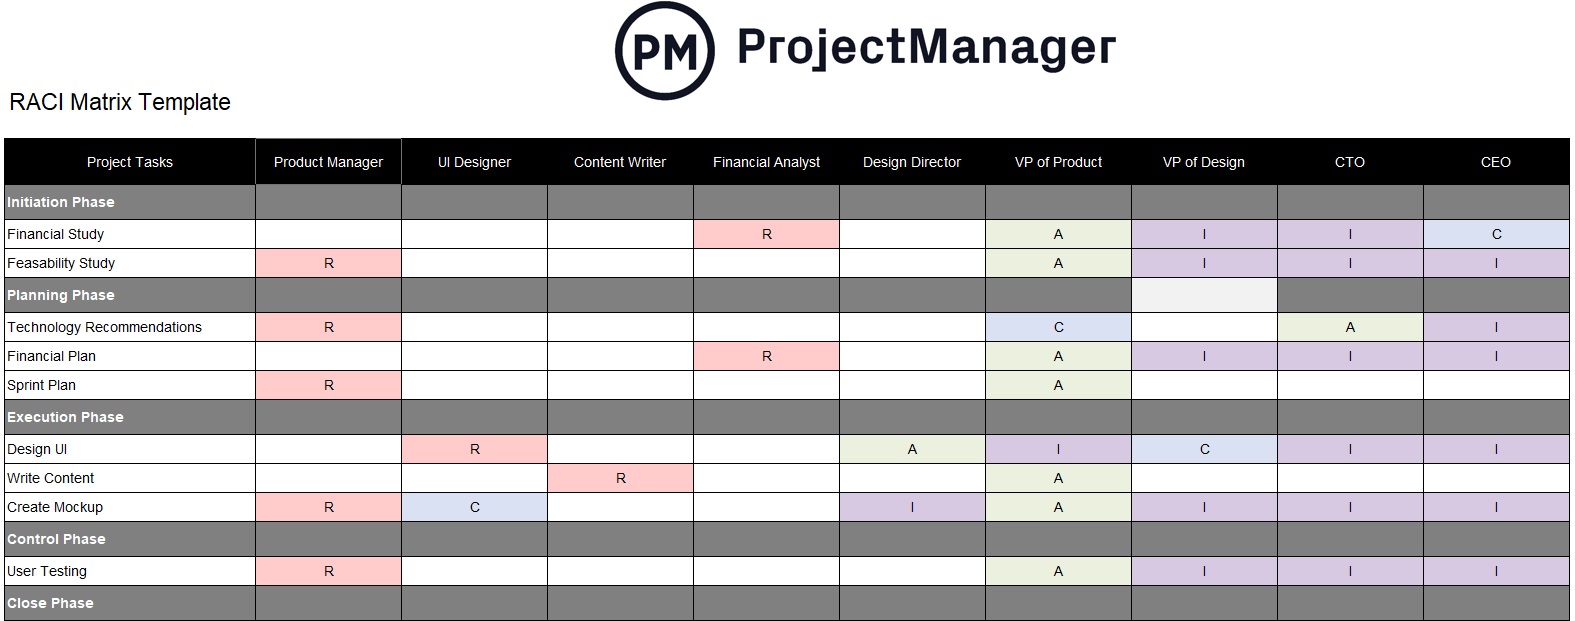 ProjectManager's RACI template for Excel